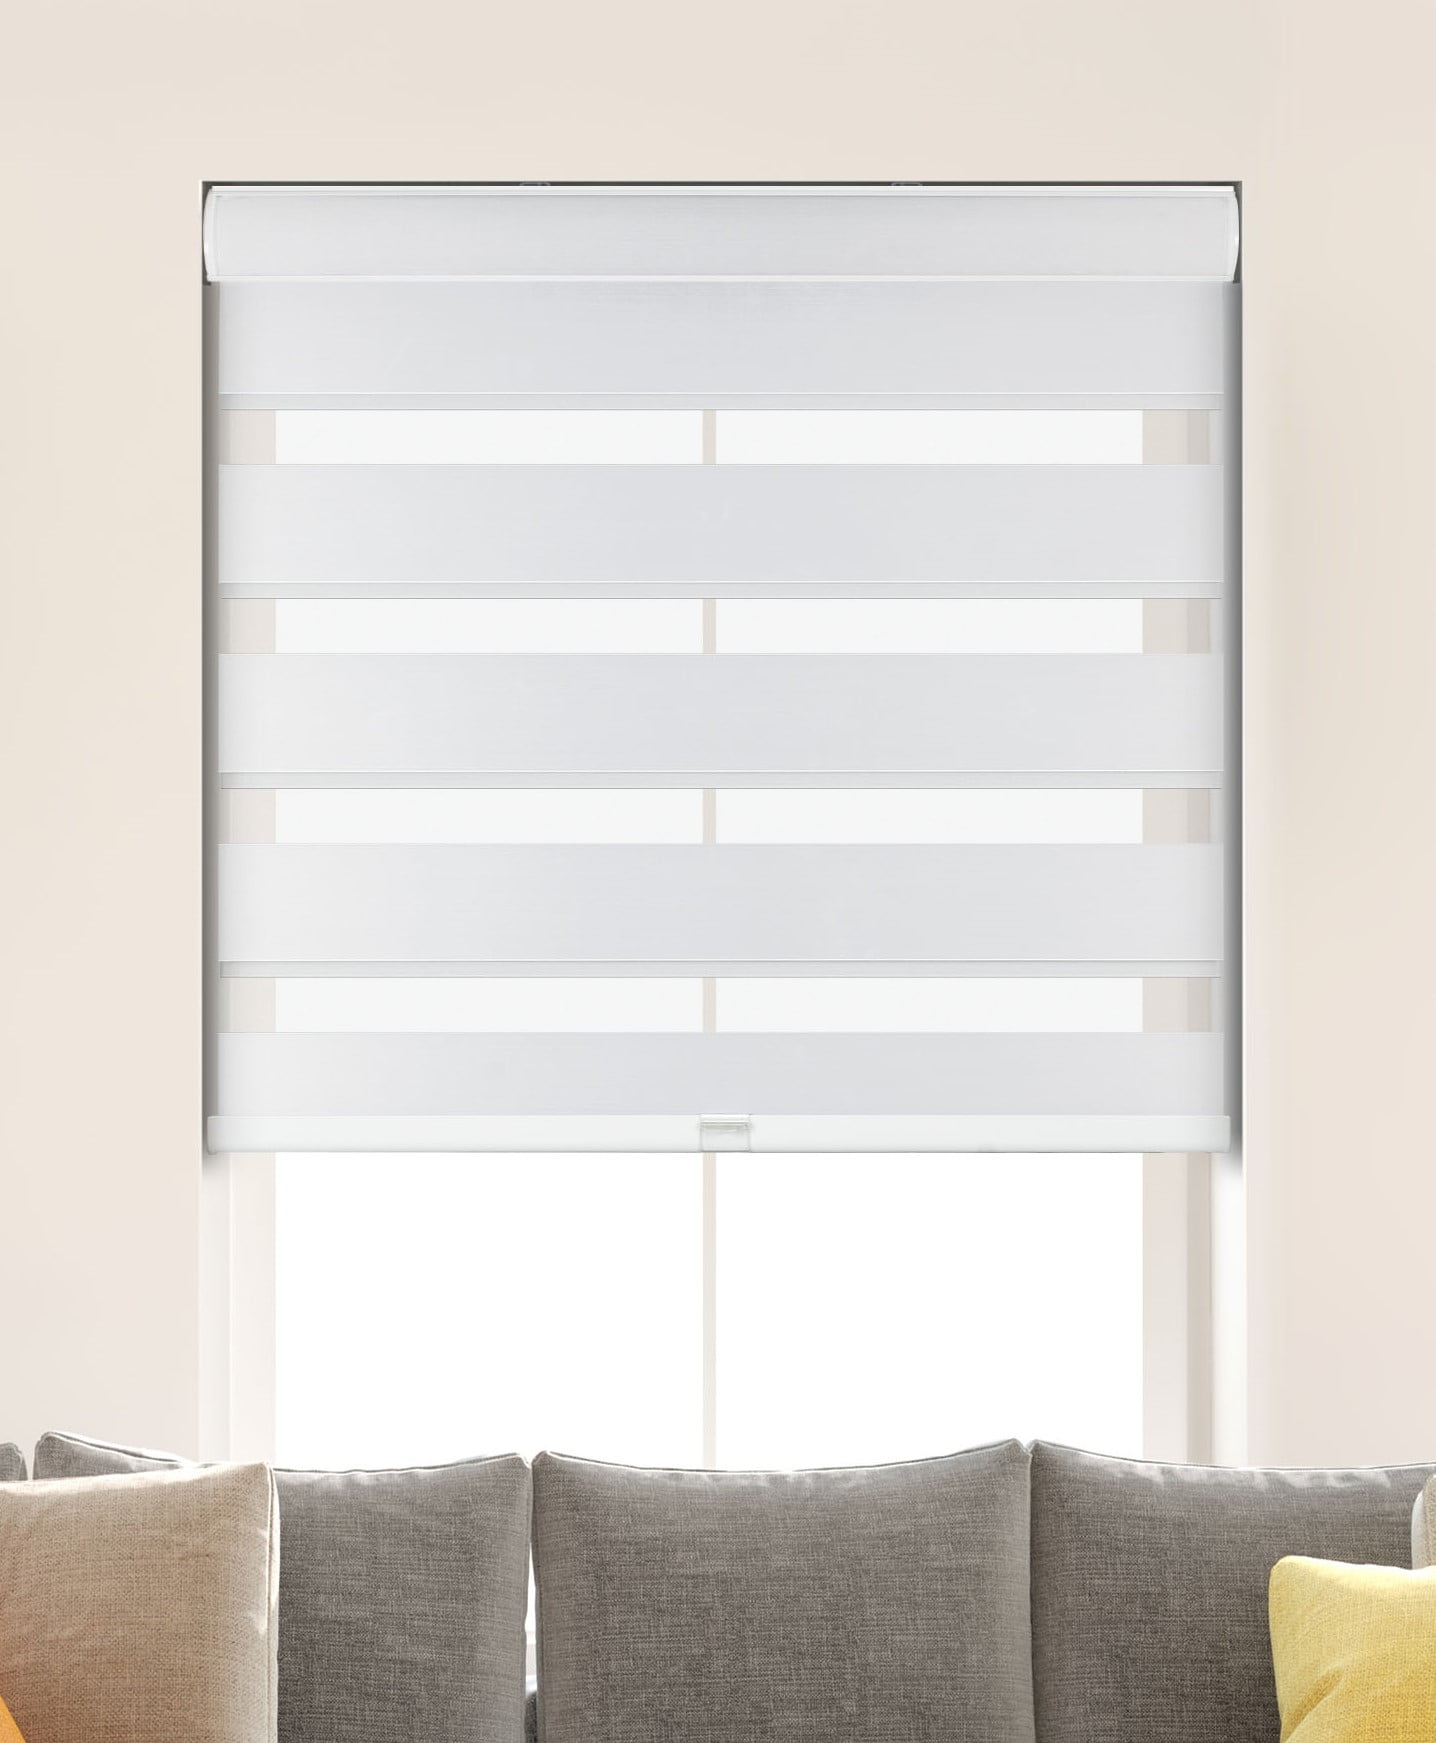 Details about   Cordless Window Roller Shades Free-Stop Dual Layer Zebra Blinds 58"x72" 